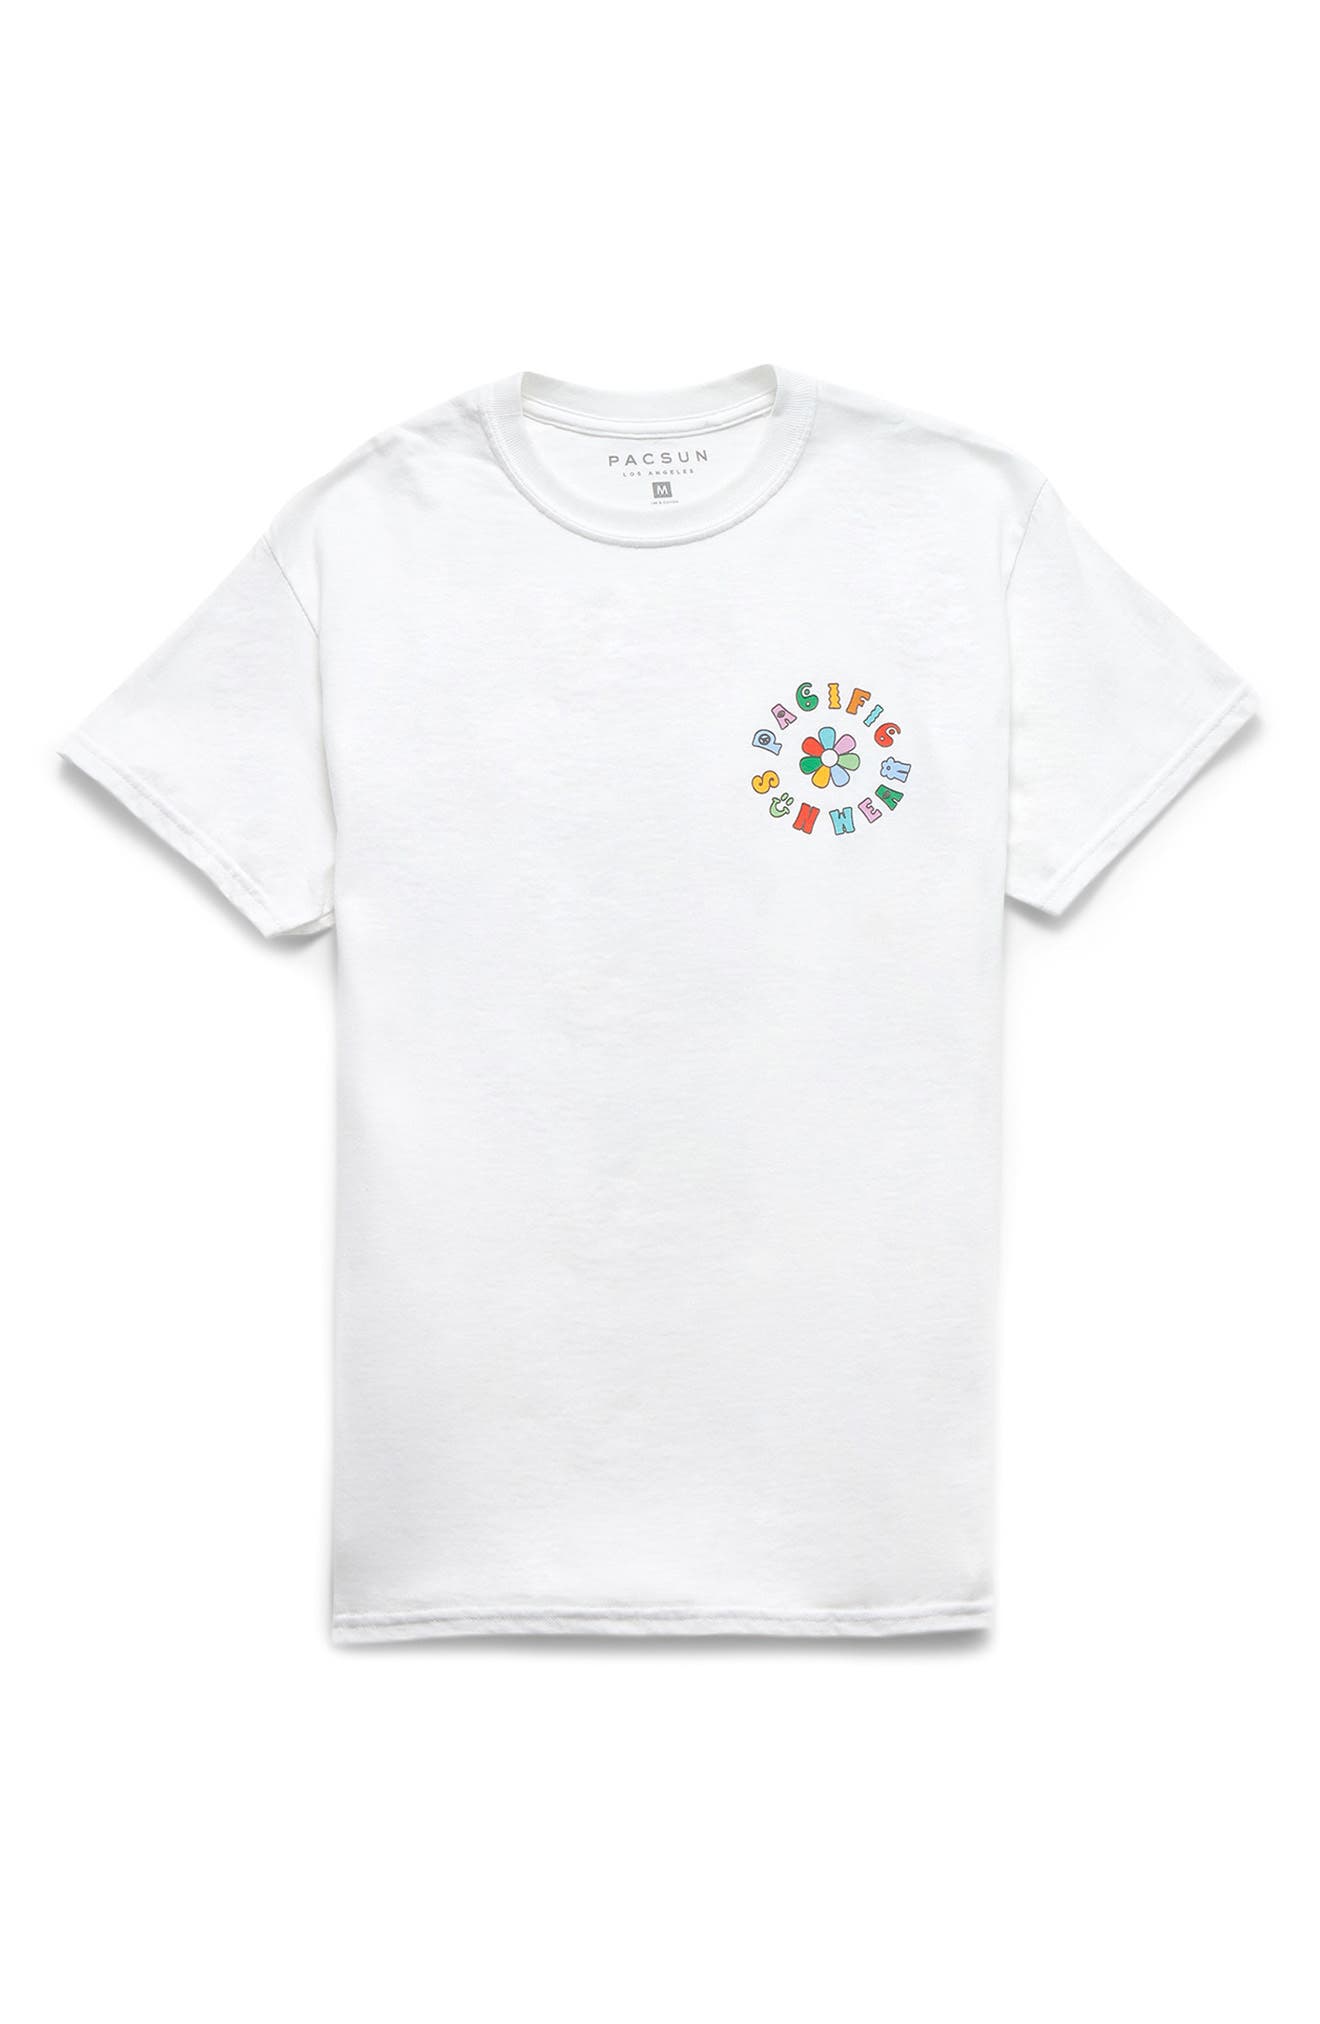 Floral Icon Graphic Tee PACSUN